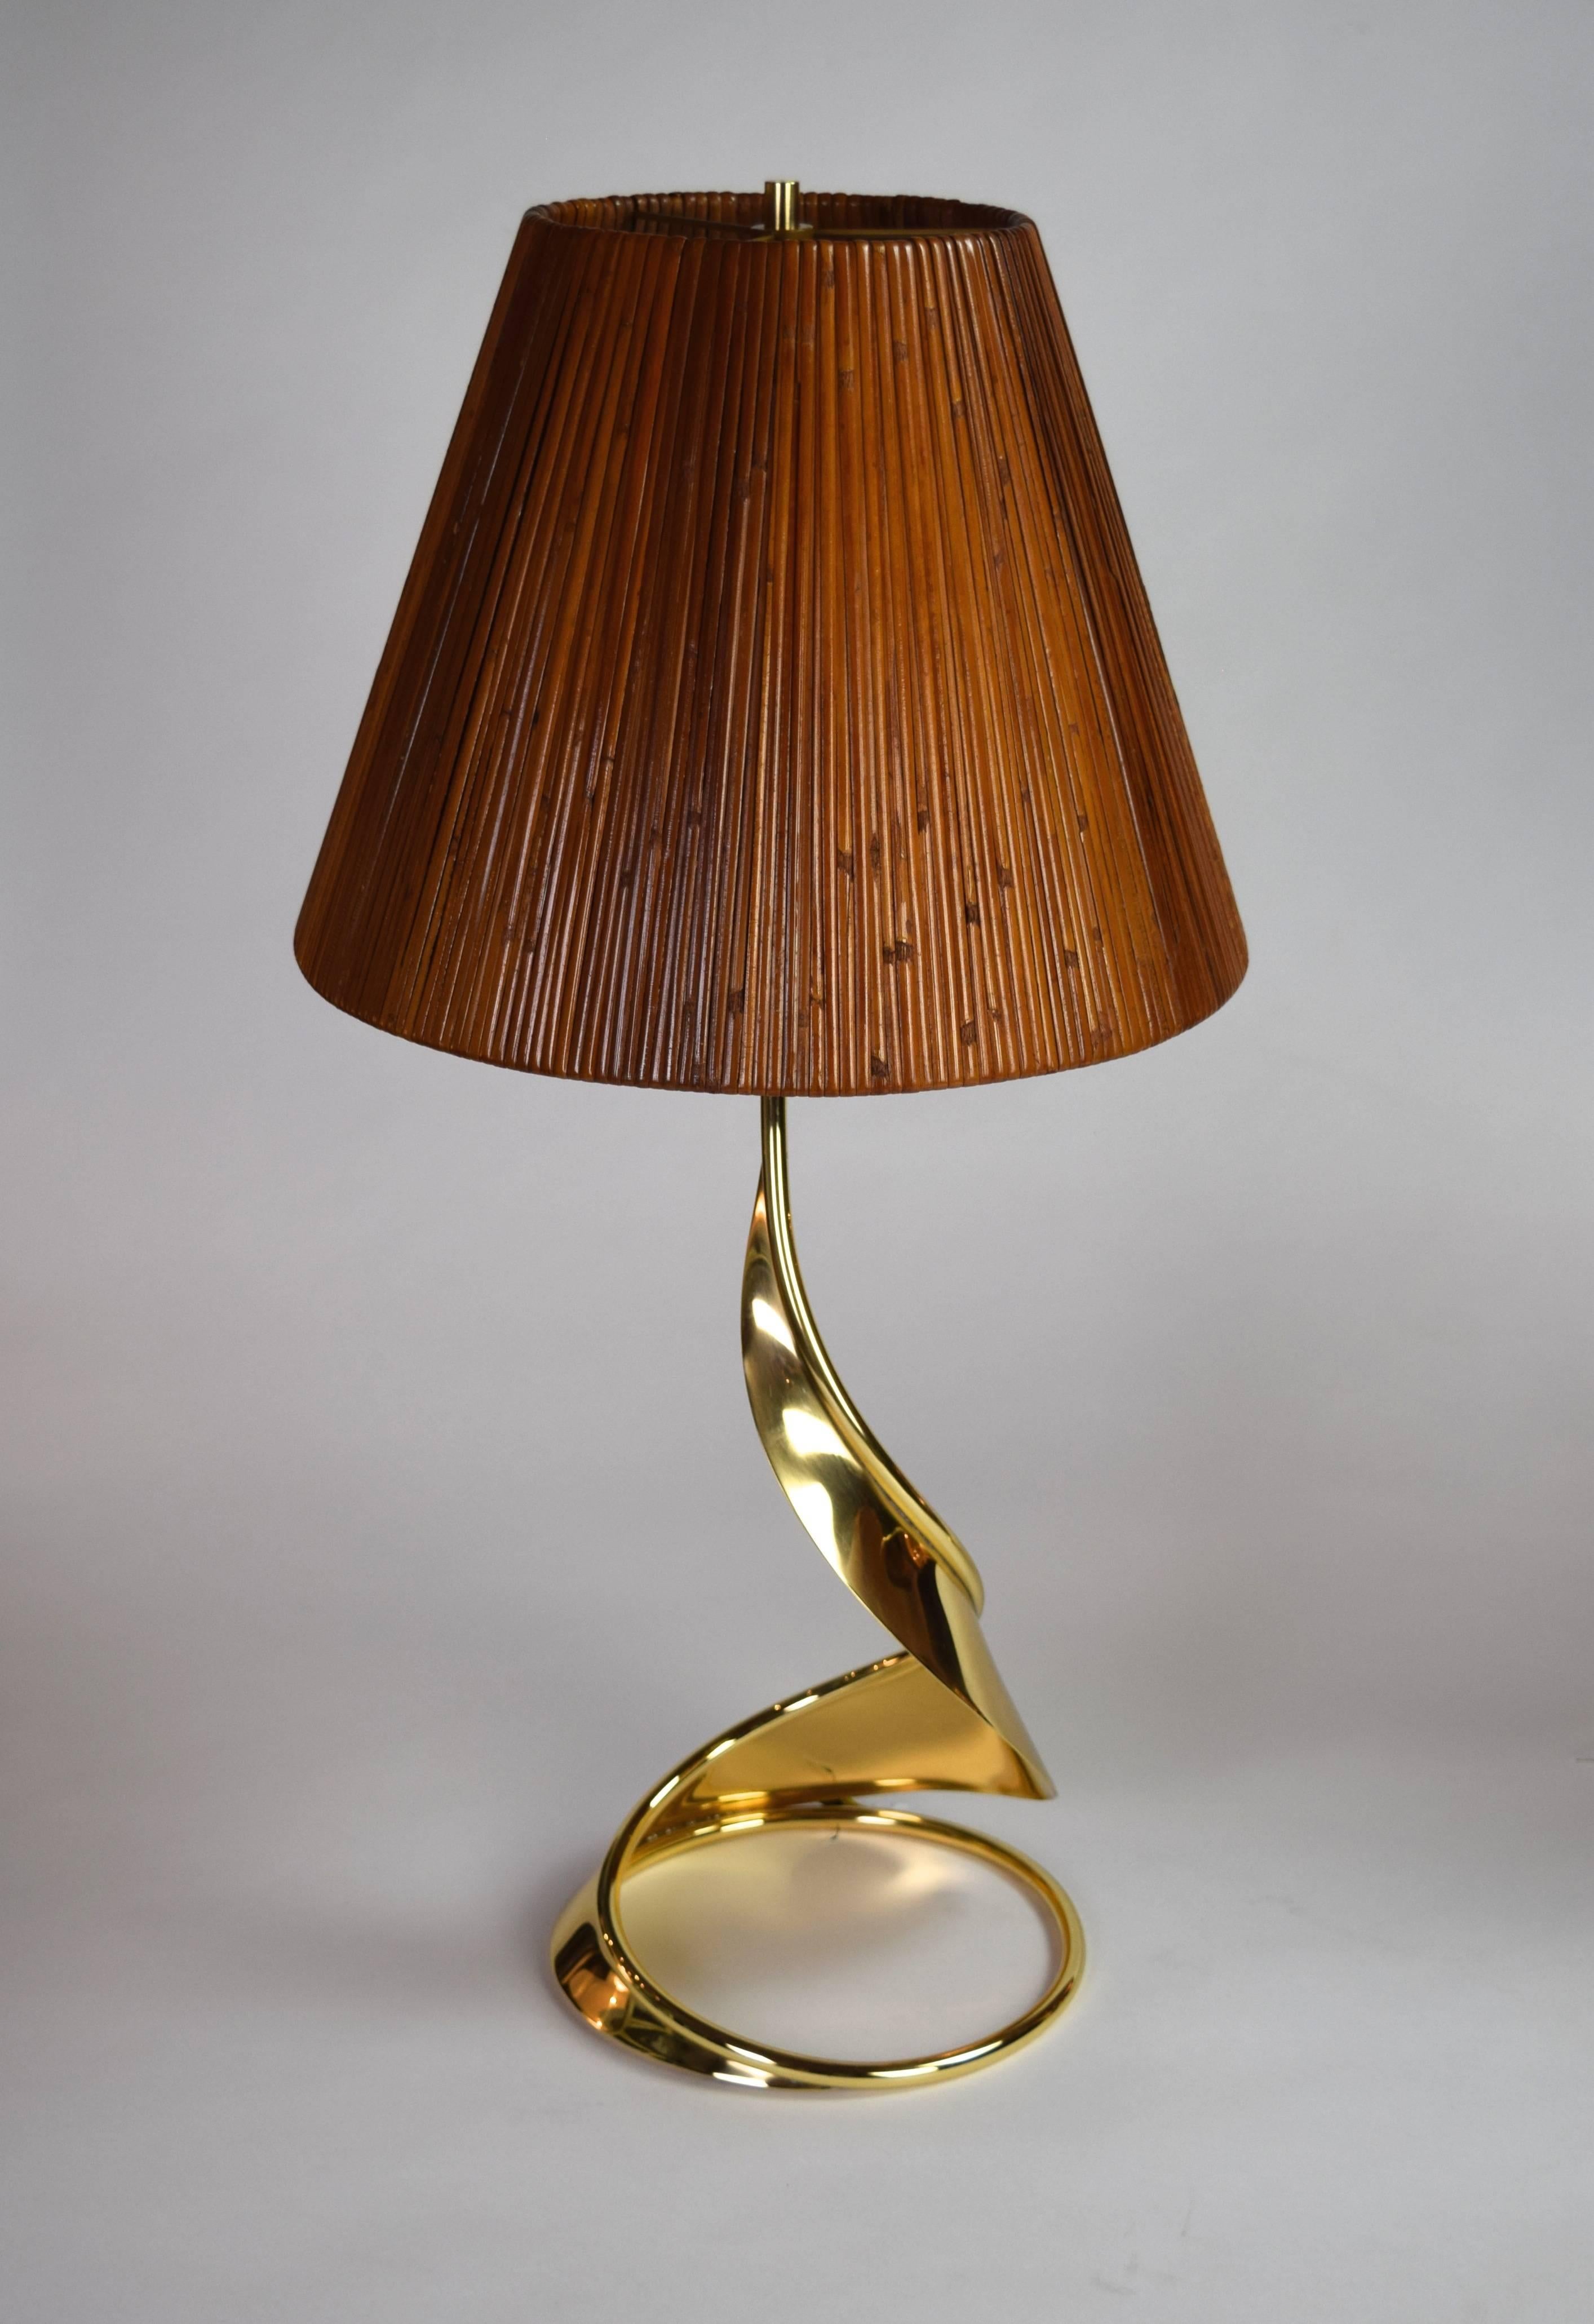 American Pair of Brass Spiral Lamps with Bamboo Shades